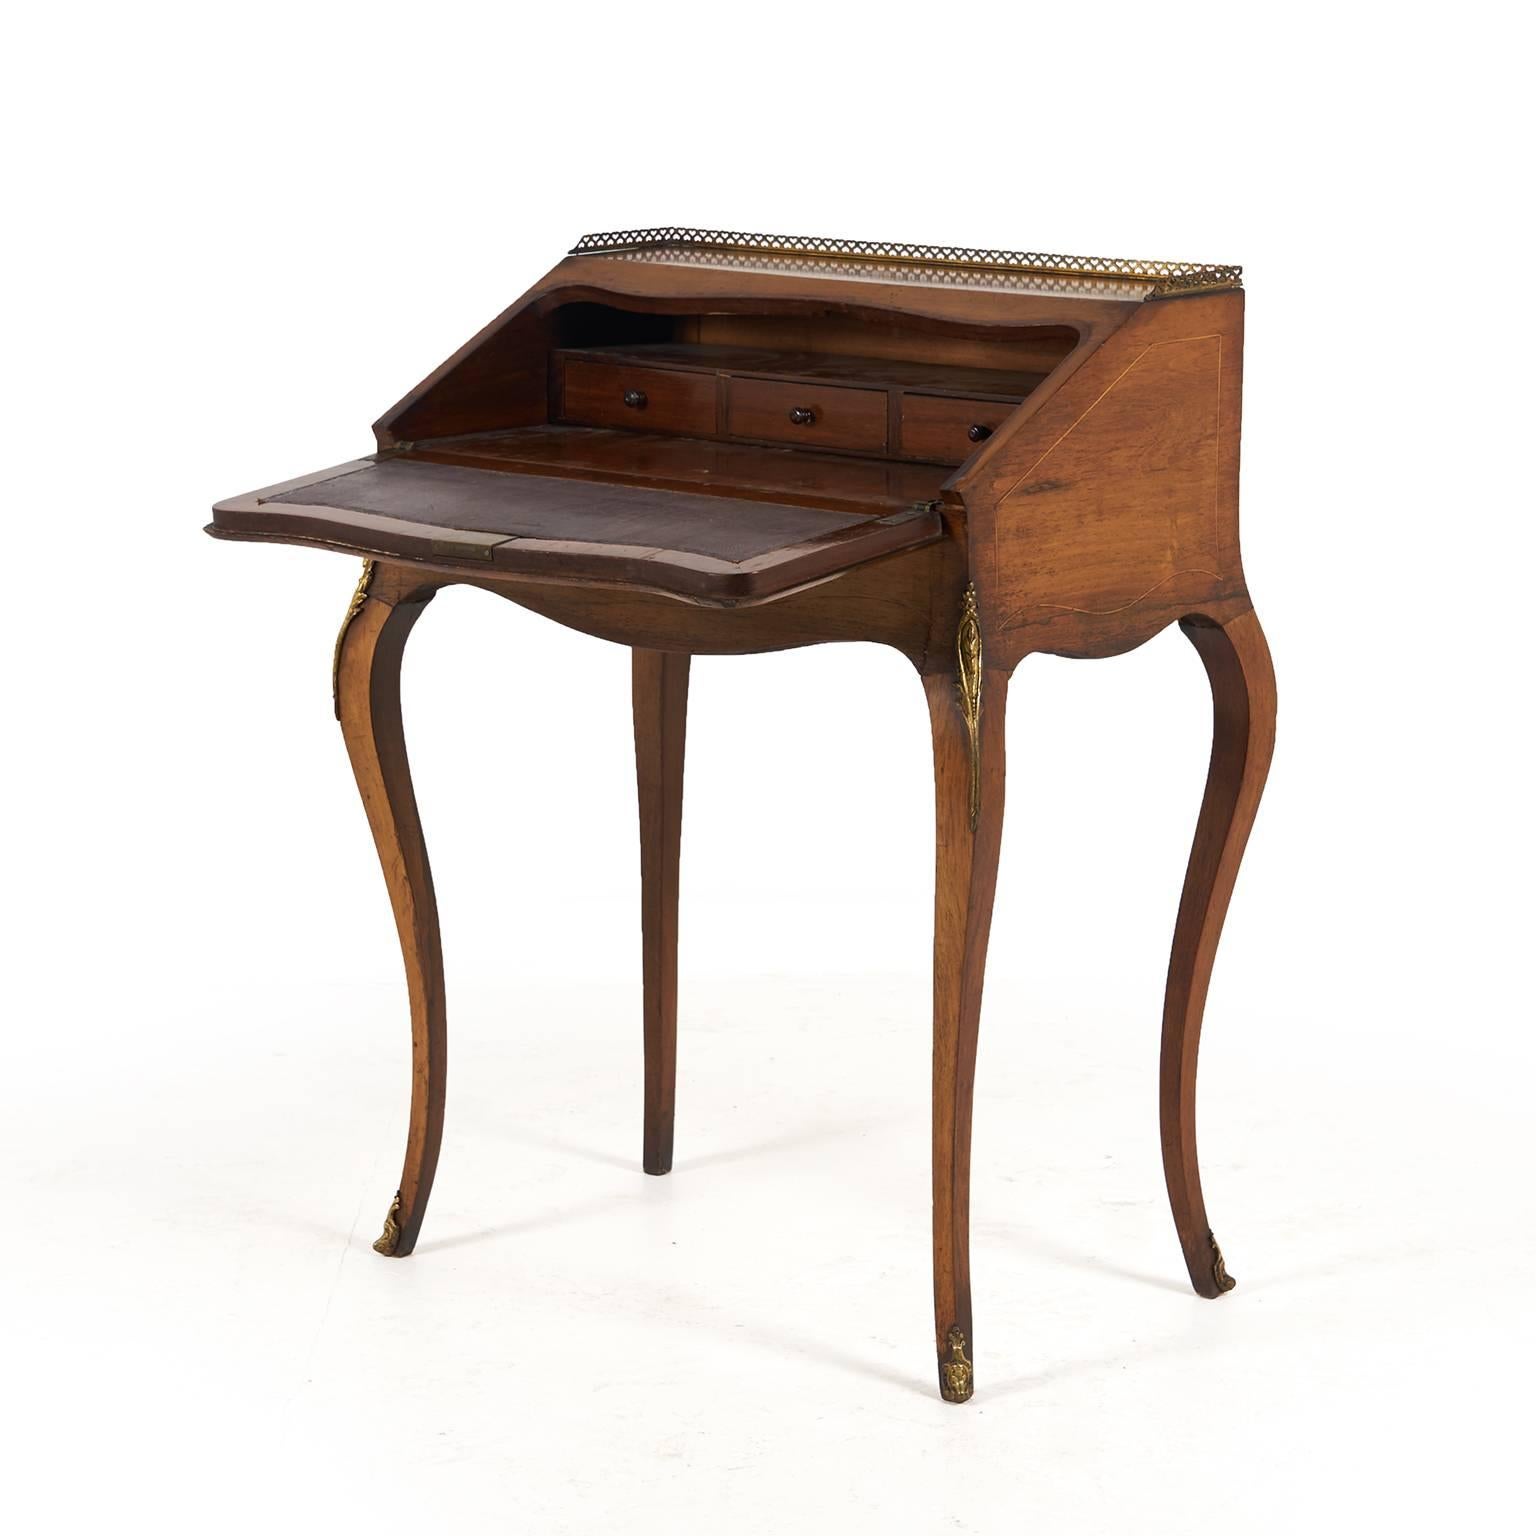 19th century French inlaid drop-front desk with beautiful patina and color and subtle brass accents. Has a hide-away drawer for secret love letters, too!



